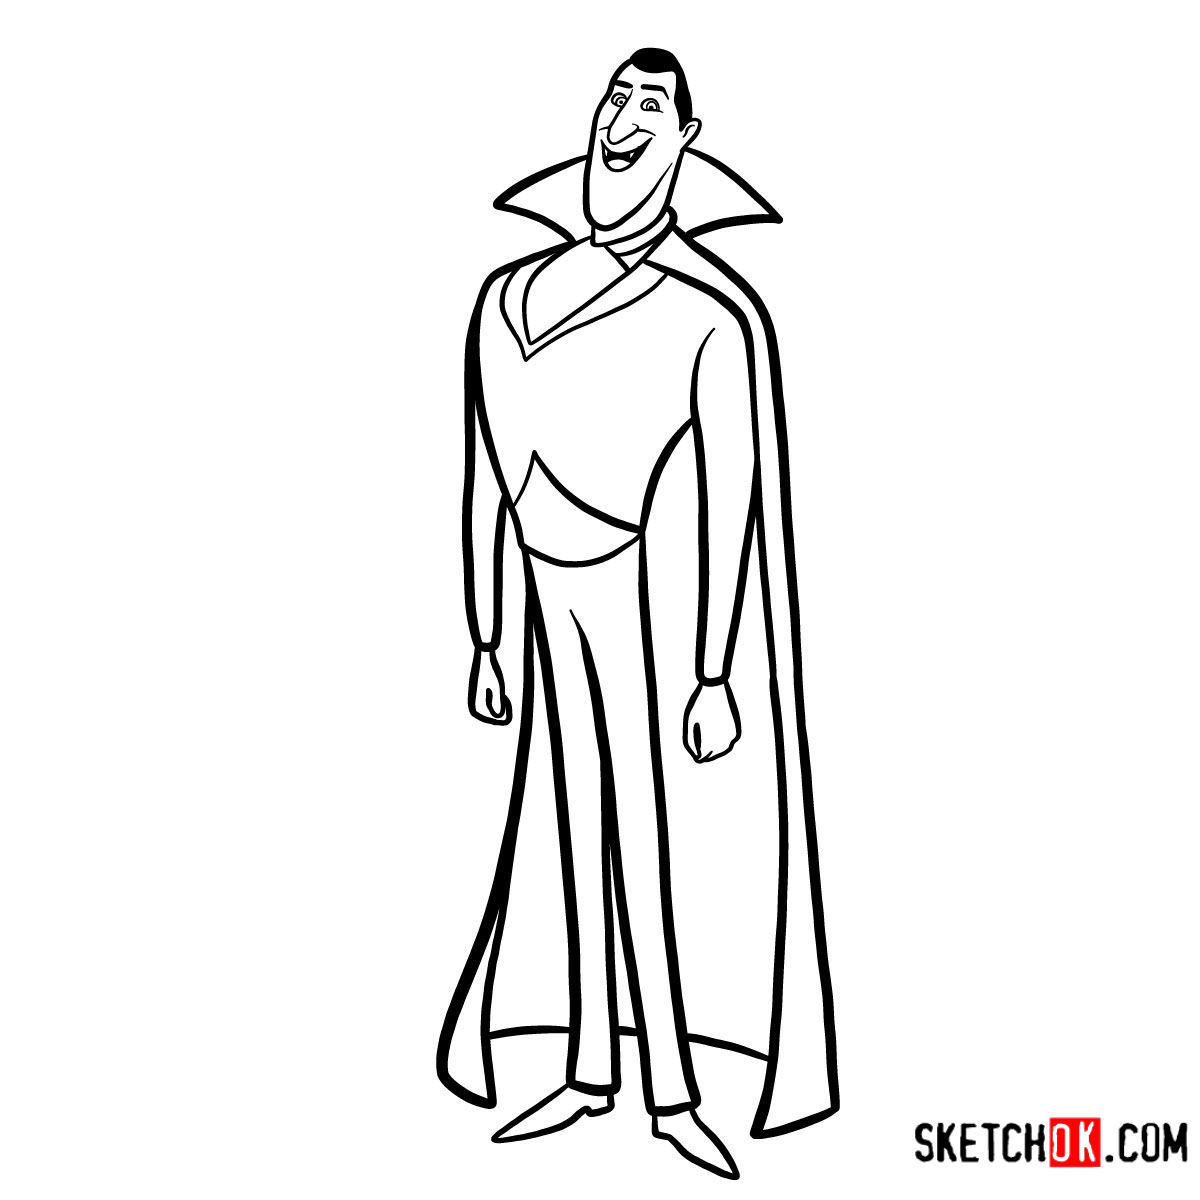 How to draw Vlad Dracula Tepes - Sketchok easy drawing guides